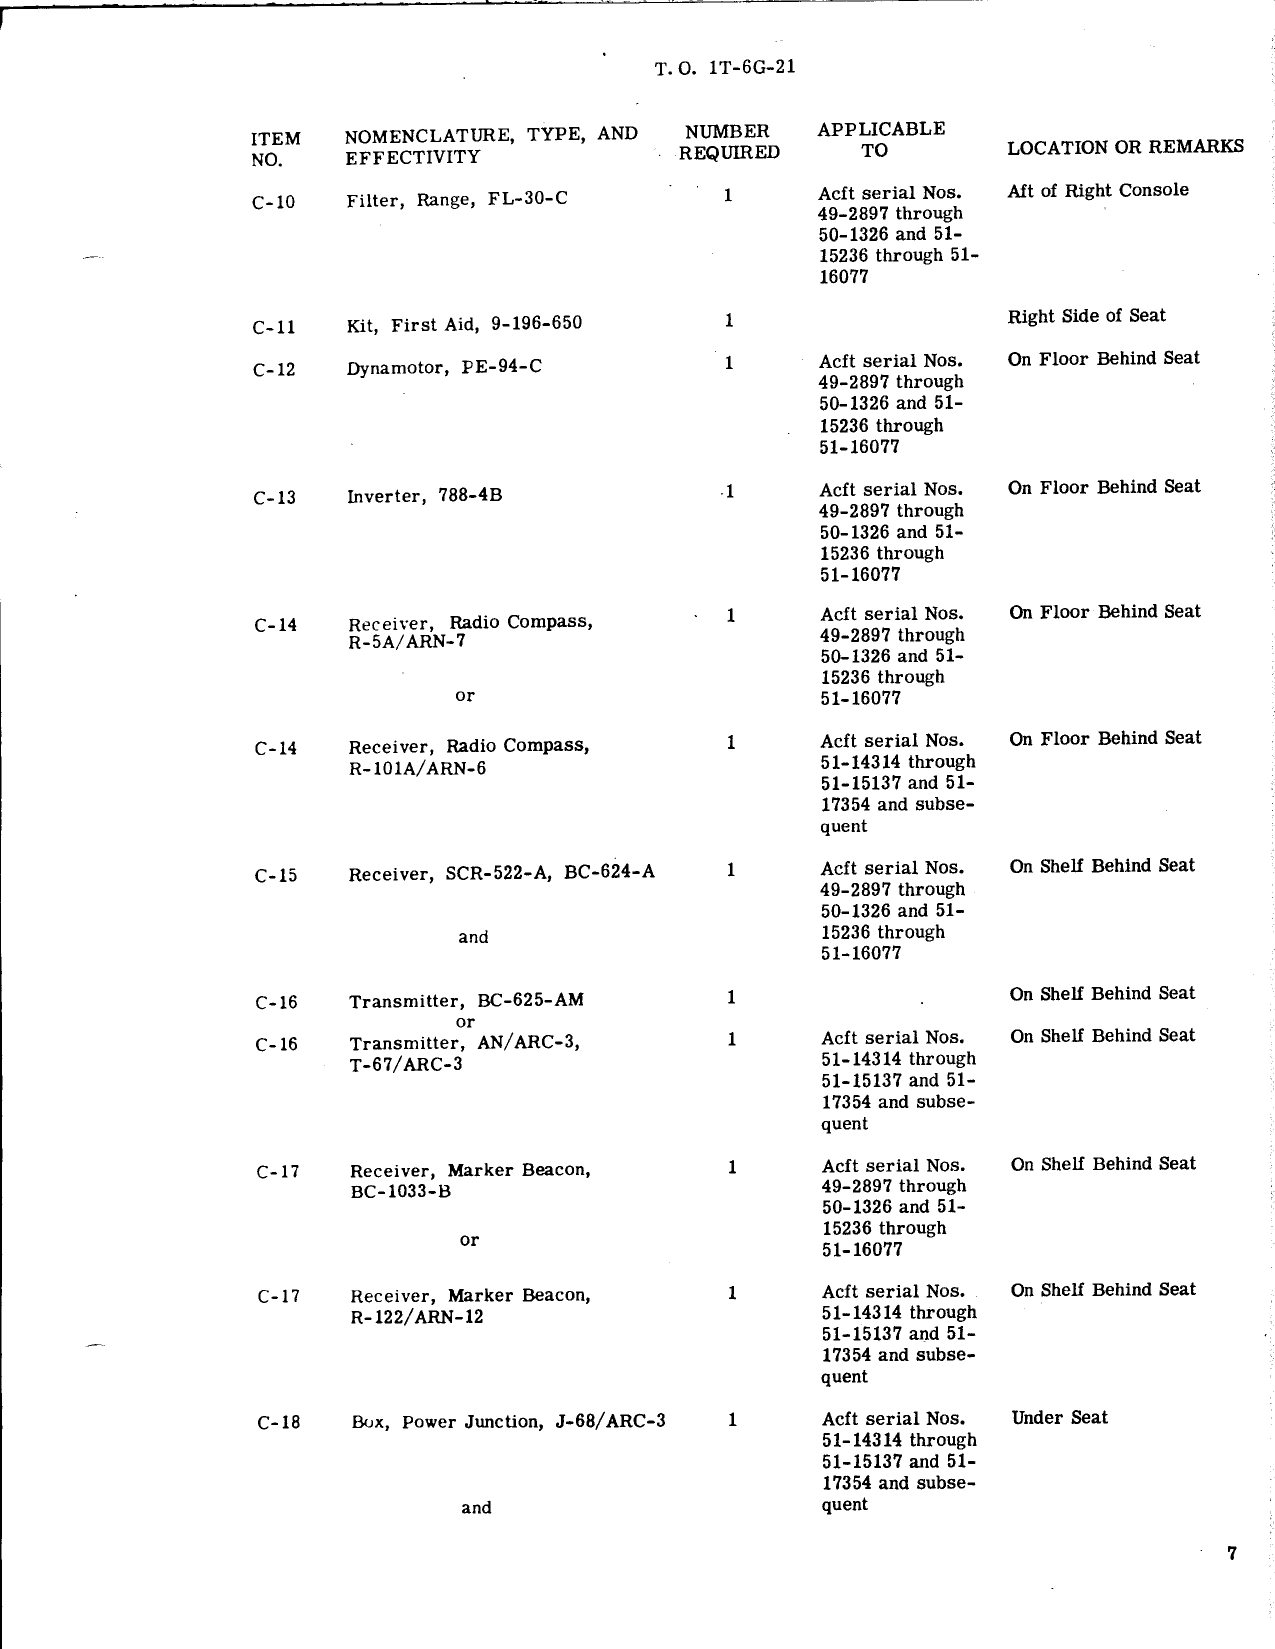 Sample page 7 from AirCorps Library document: Aircraft Inventory Record Master Guide for T-6G Aircraft